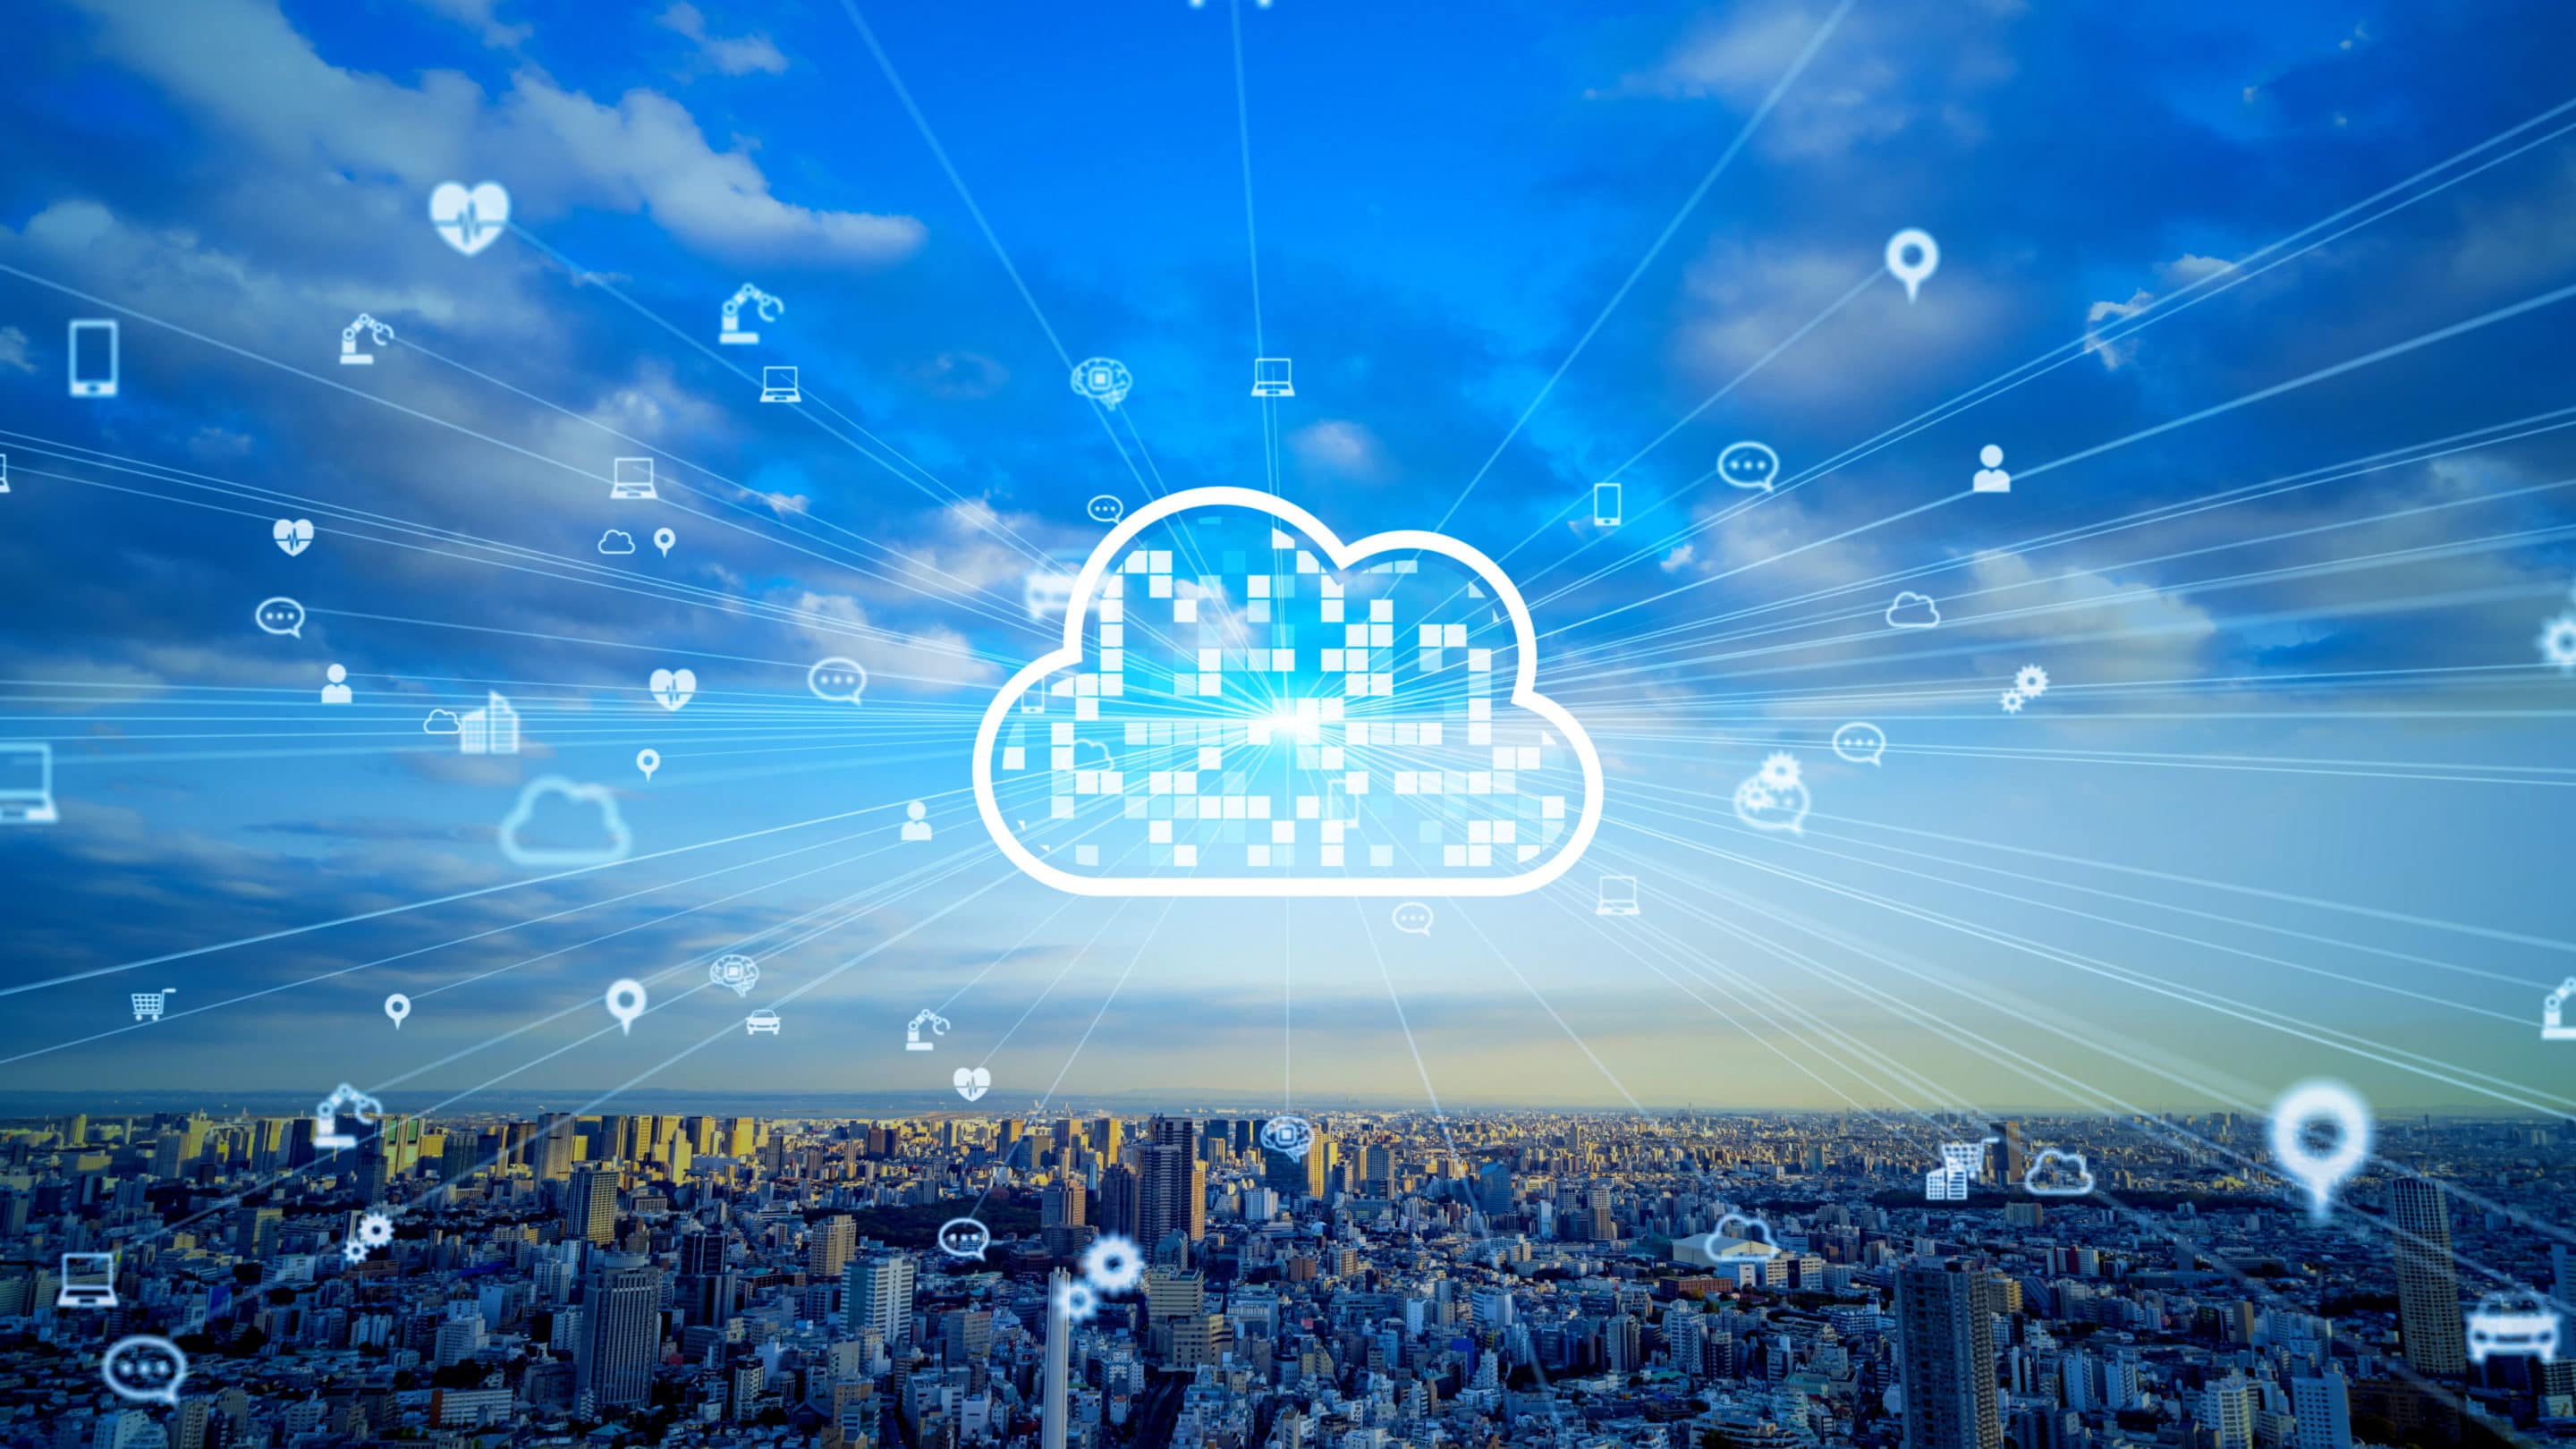 82% of Companies Give Third Parties Access to All Cloud Data